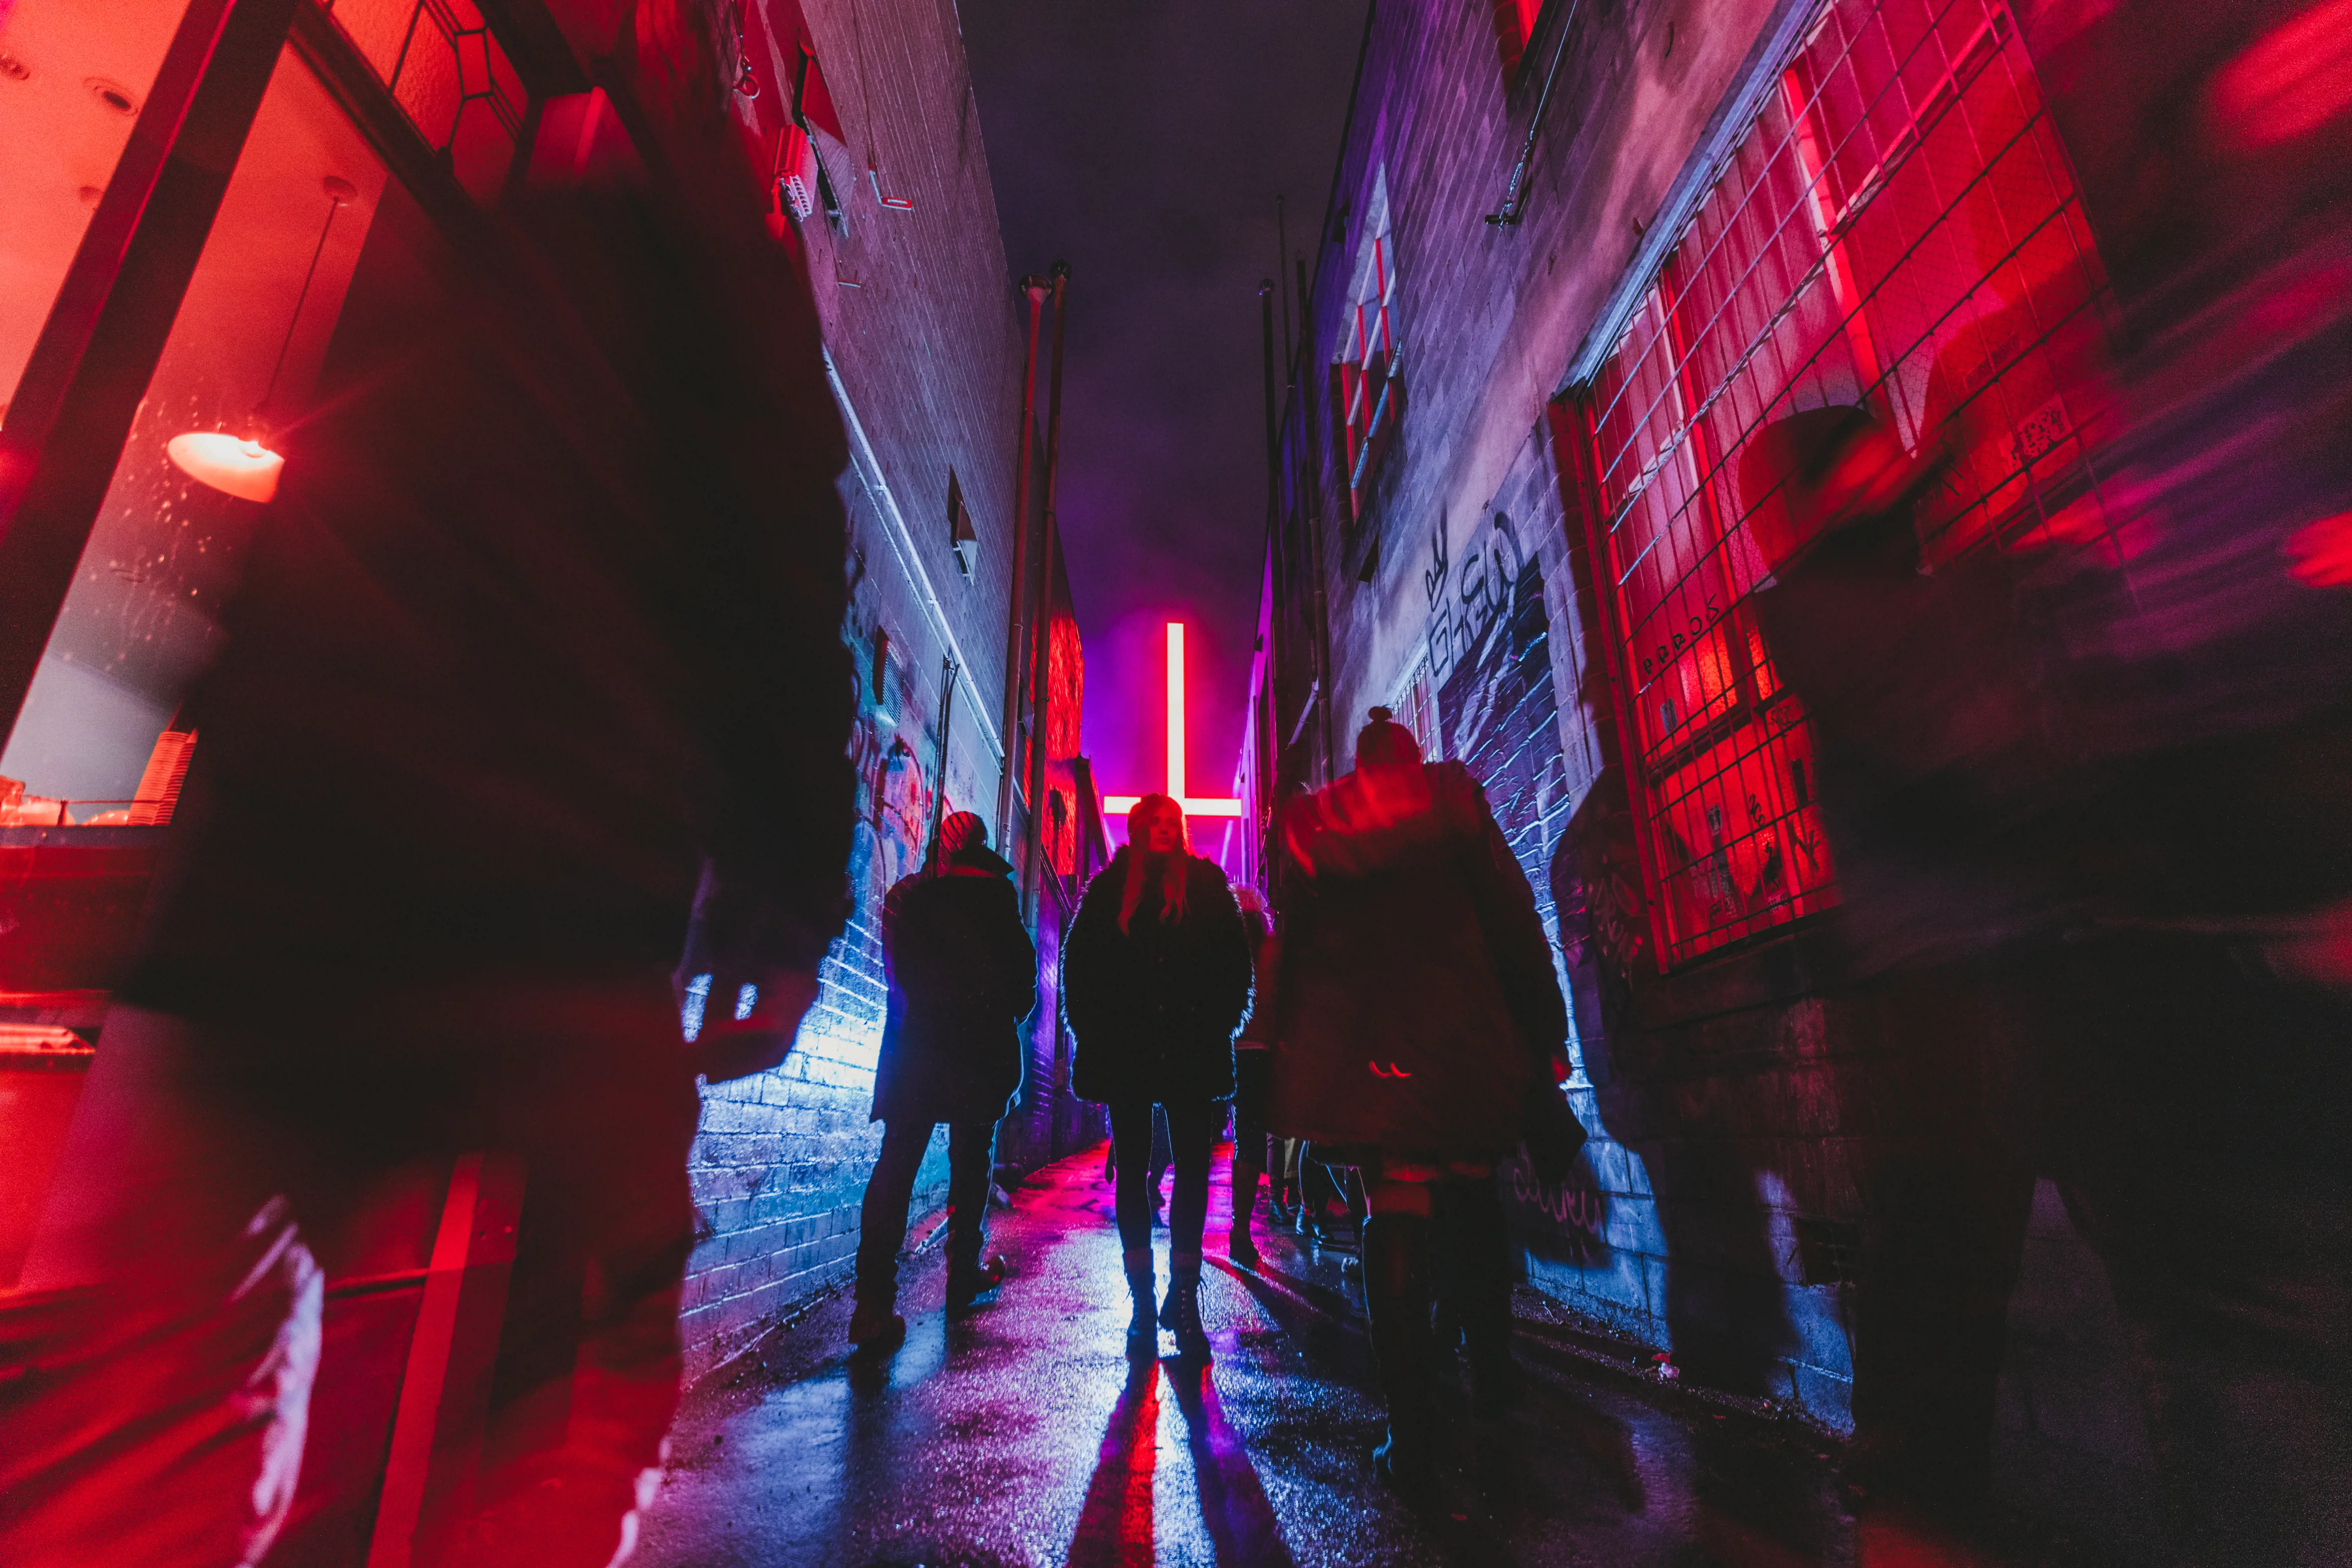 A large neon cross is suspended above people walking down a narrow alleyway at night.